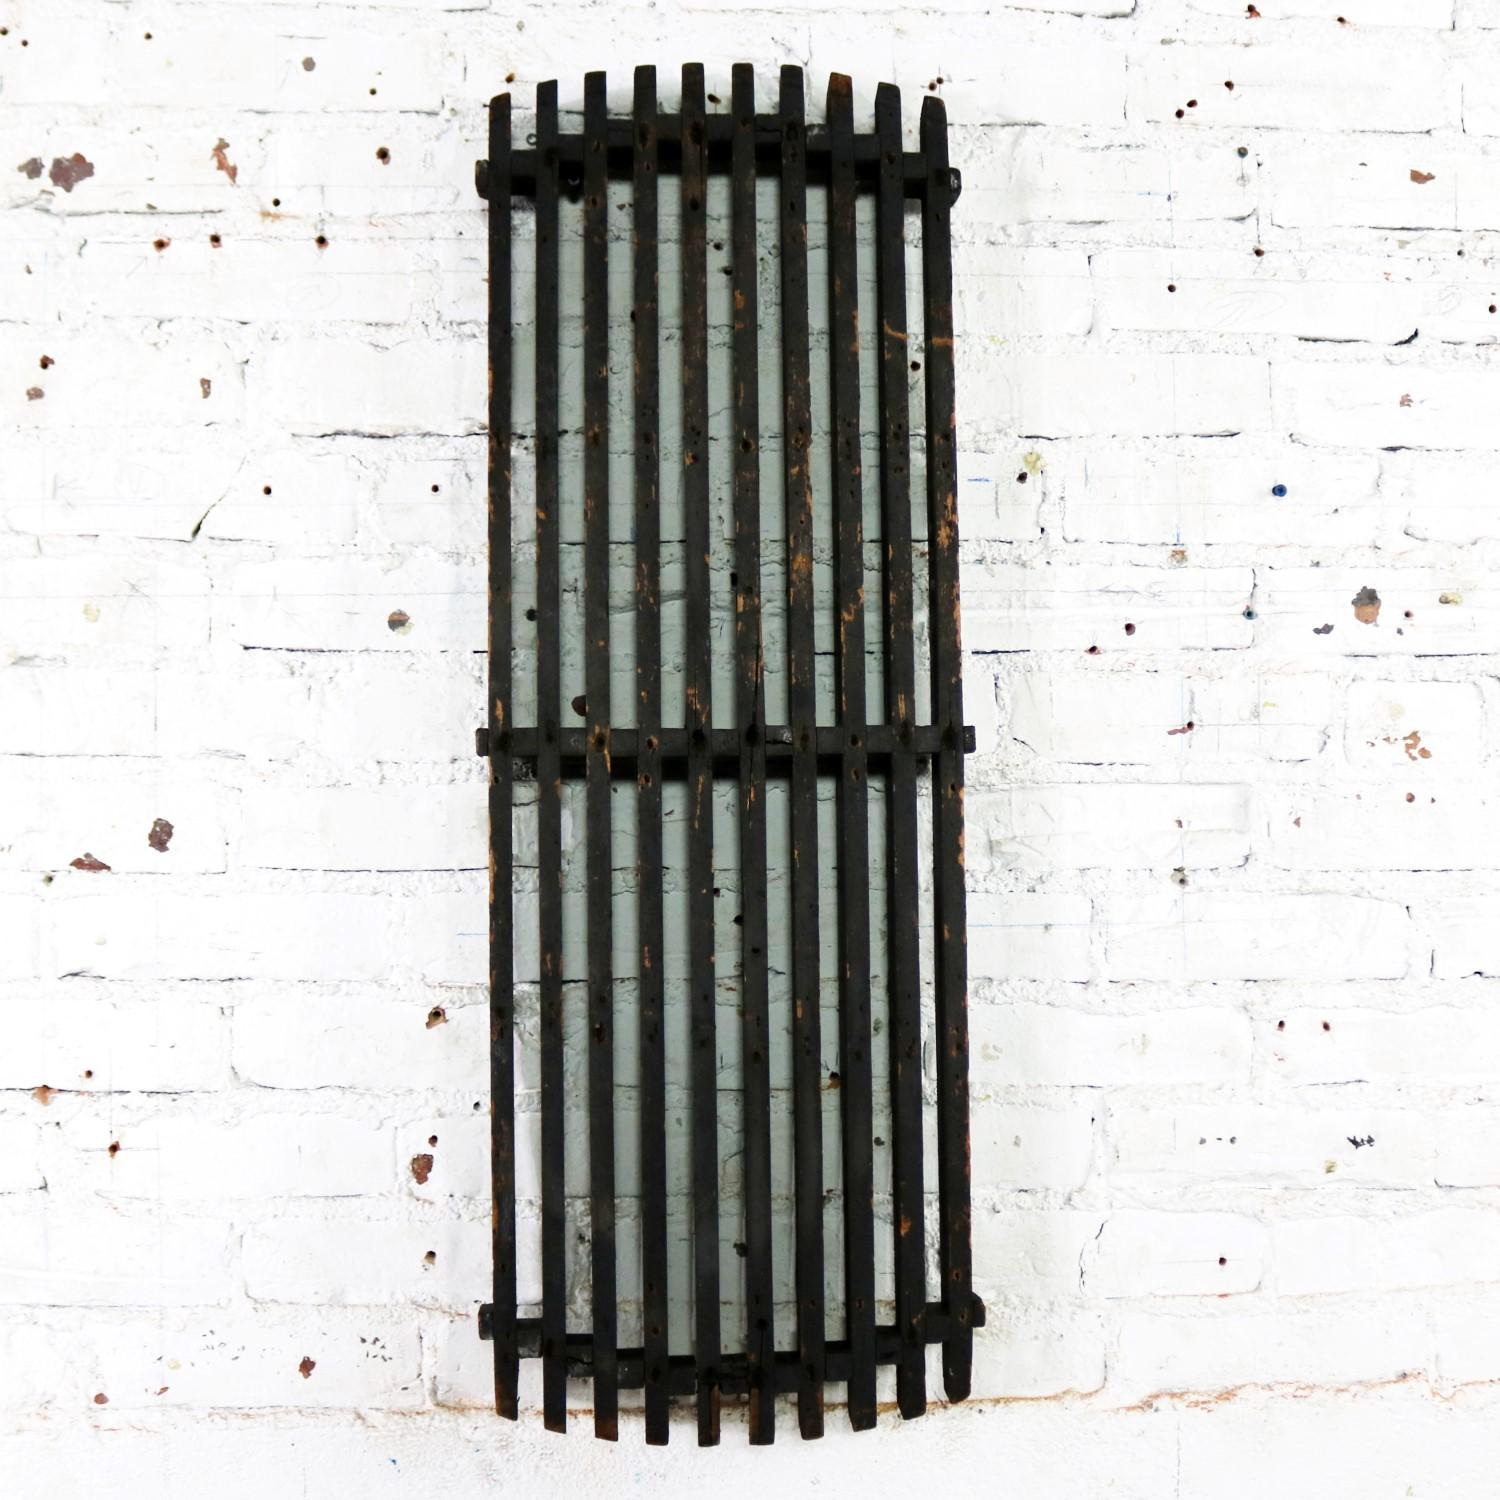 Incredible antique handmade wood industrial foundry pattern. A single long narrow slatted form. This was created to make the sand cast molds for casting an iron sewage grates or other type grill. It is in wonderful antique condition with fabulous